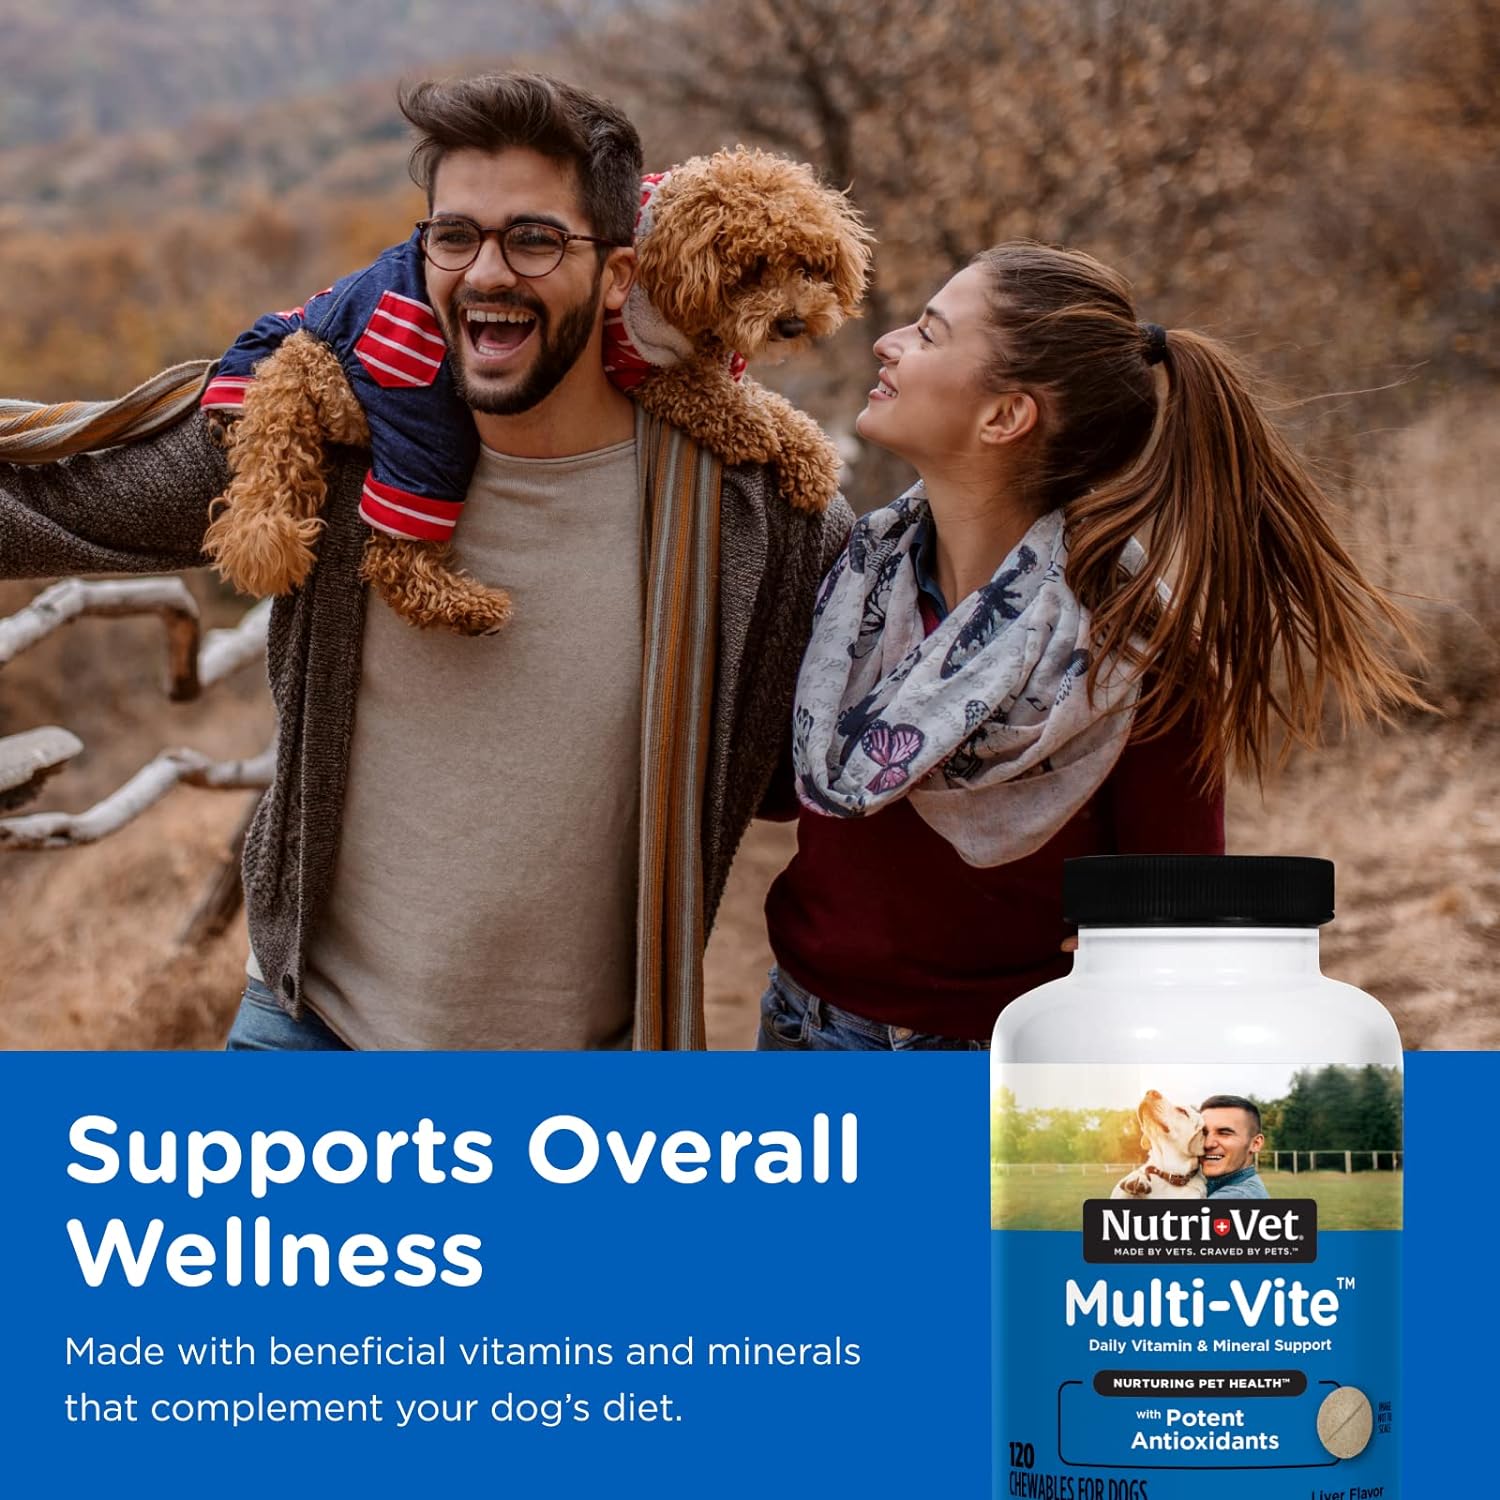 Nutri-Vet Multi-Vite Chewables for Adult Dogs - Daily Vitamin and Mineral Support to Support Balanced Diet - 120 Count : Pet Multivitamins : Pet Supplies